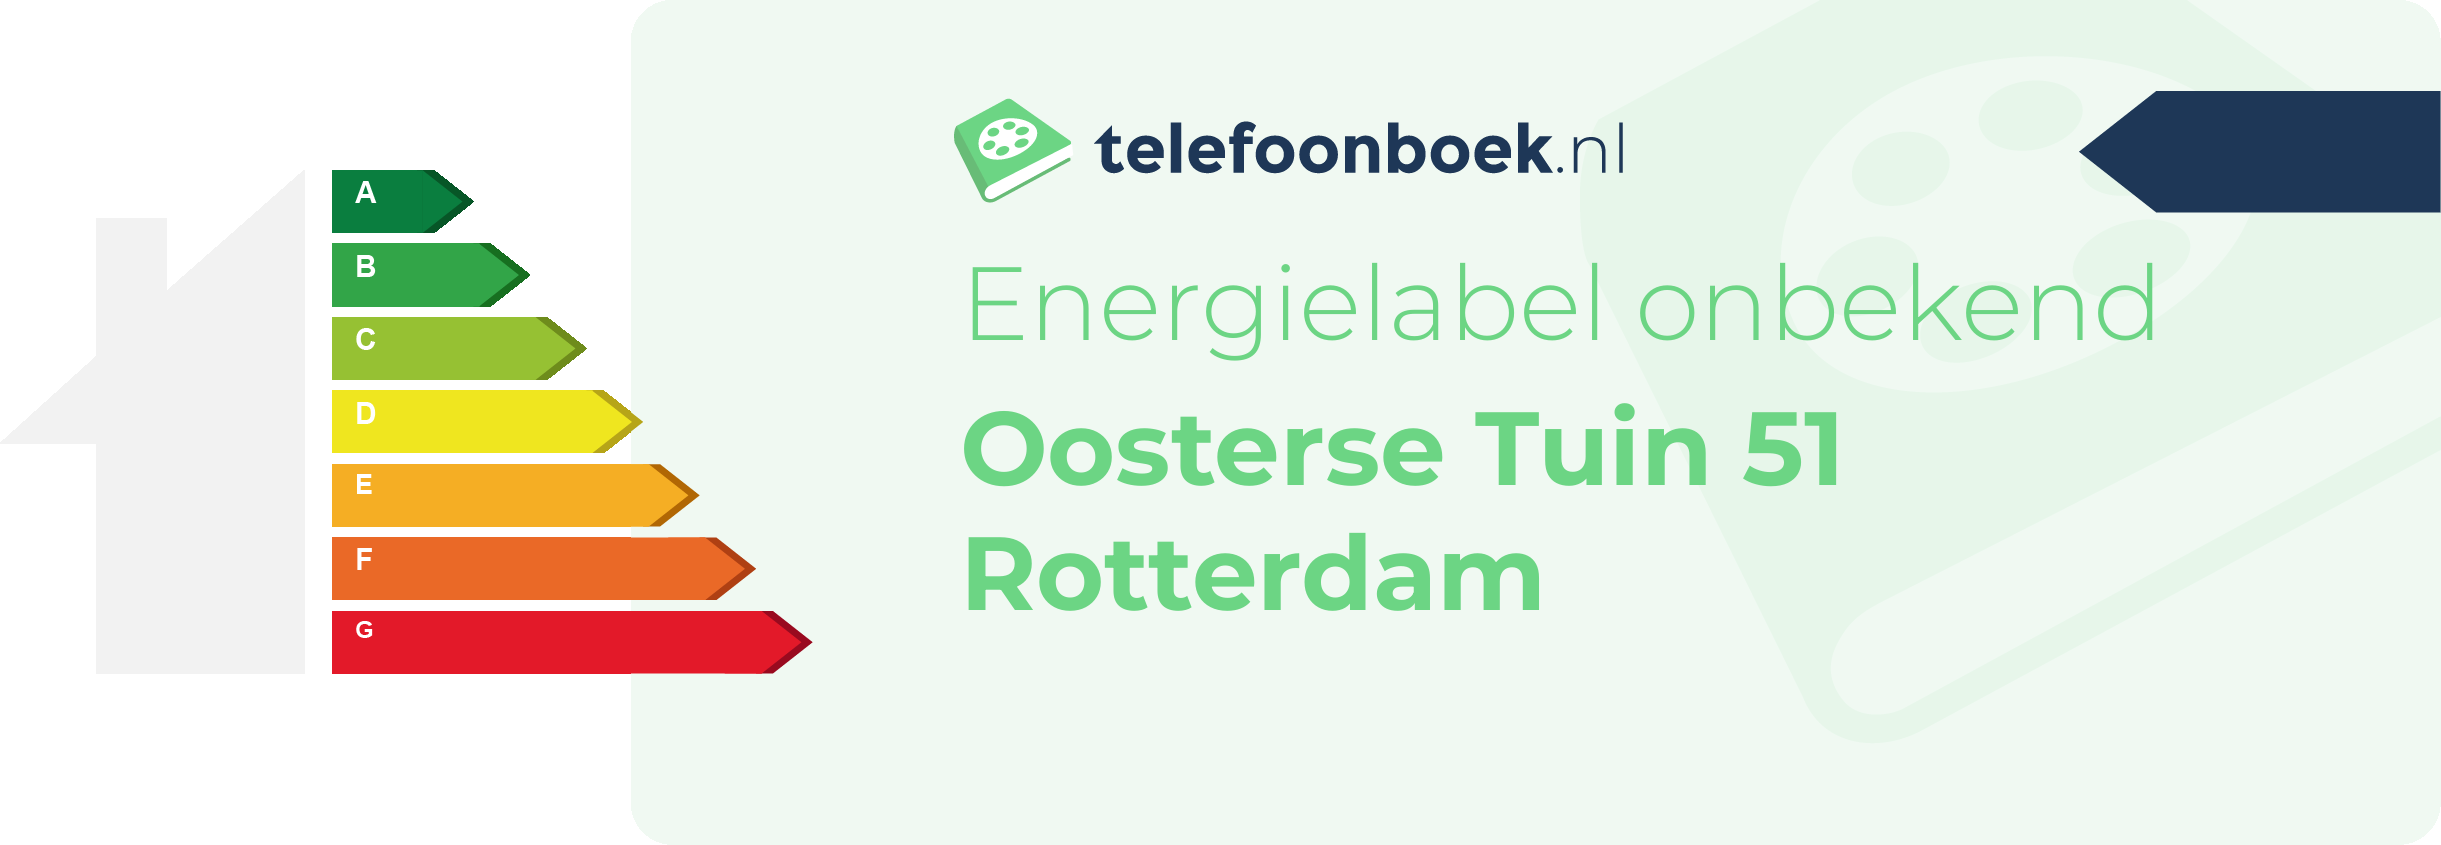 Energielabel Oosterse Tuin 51 Rotterdam